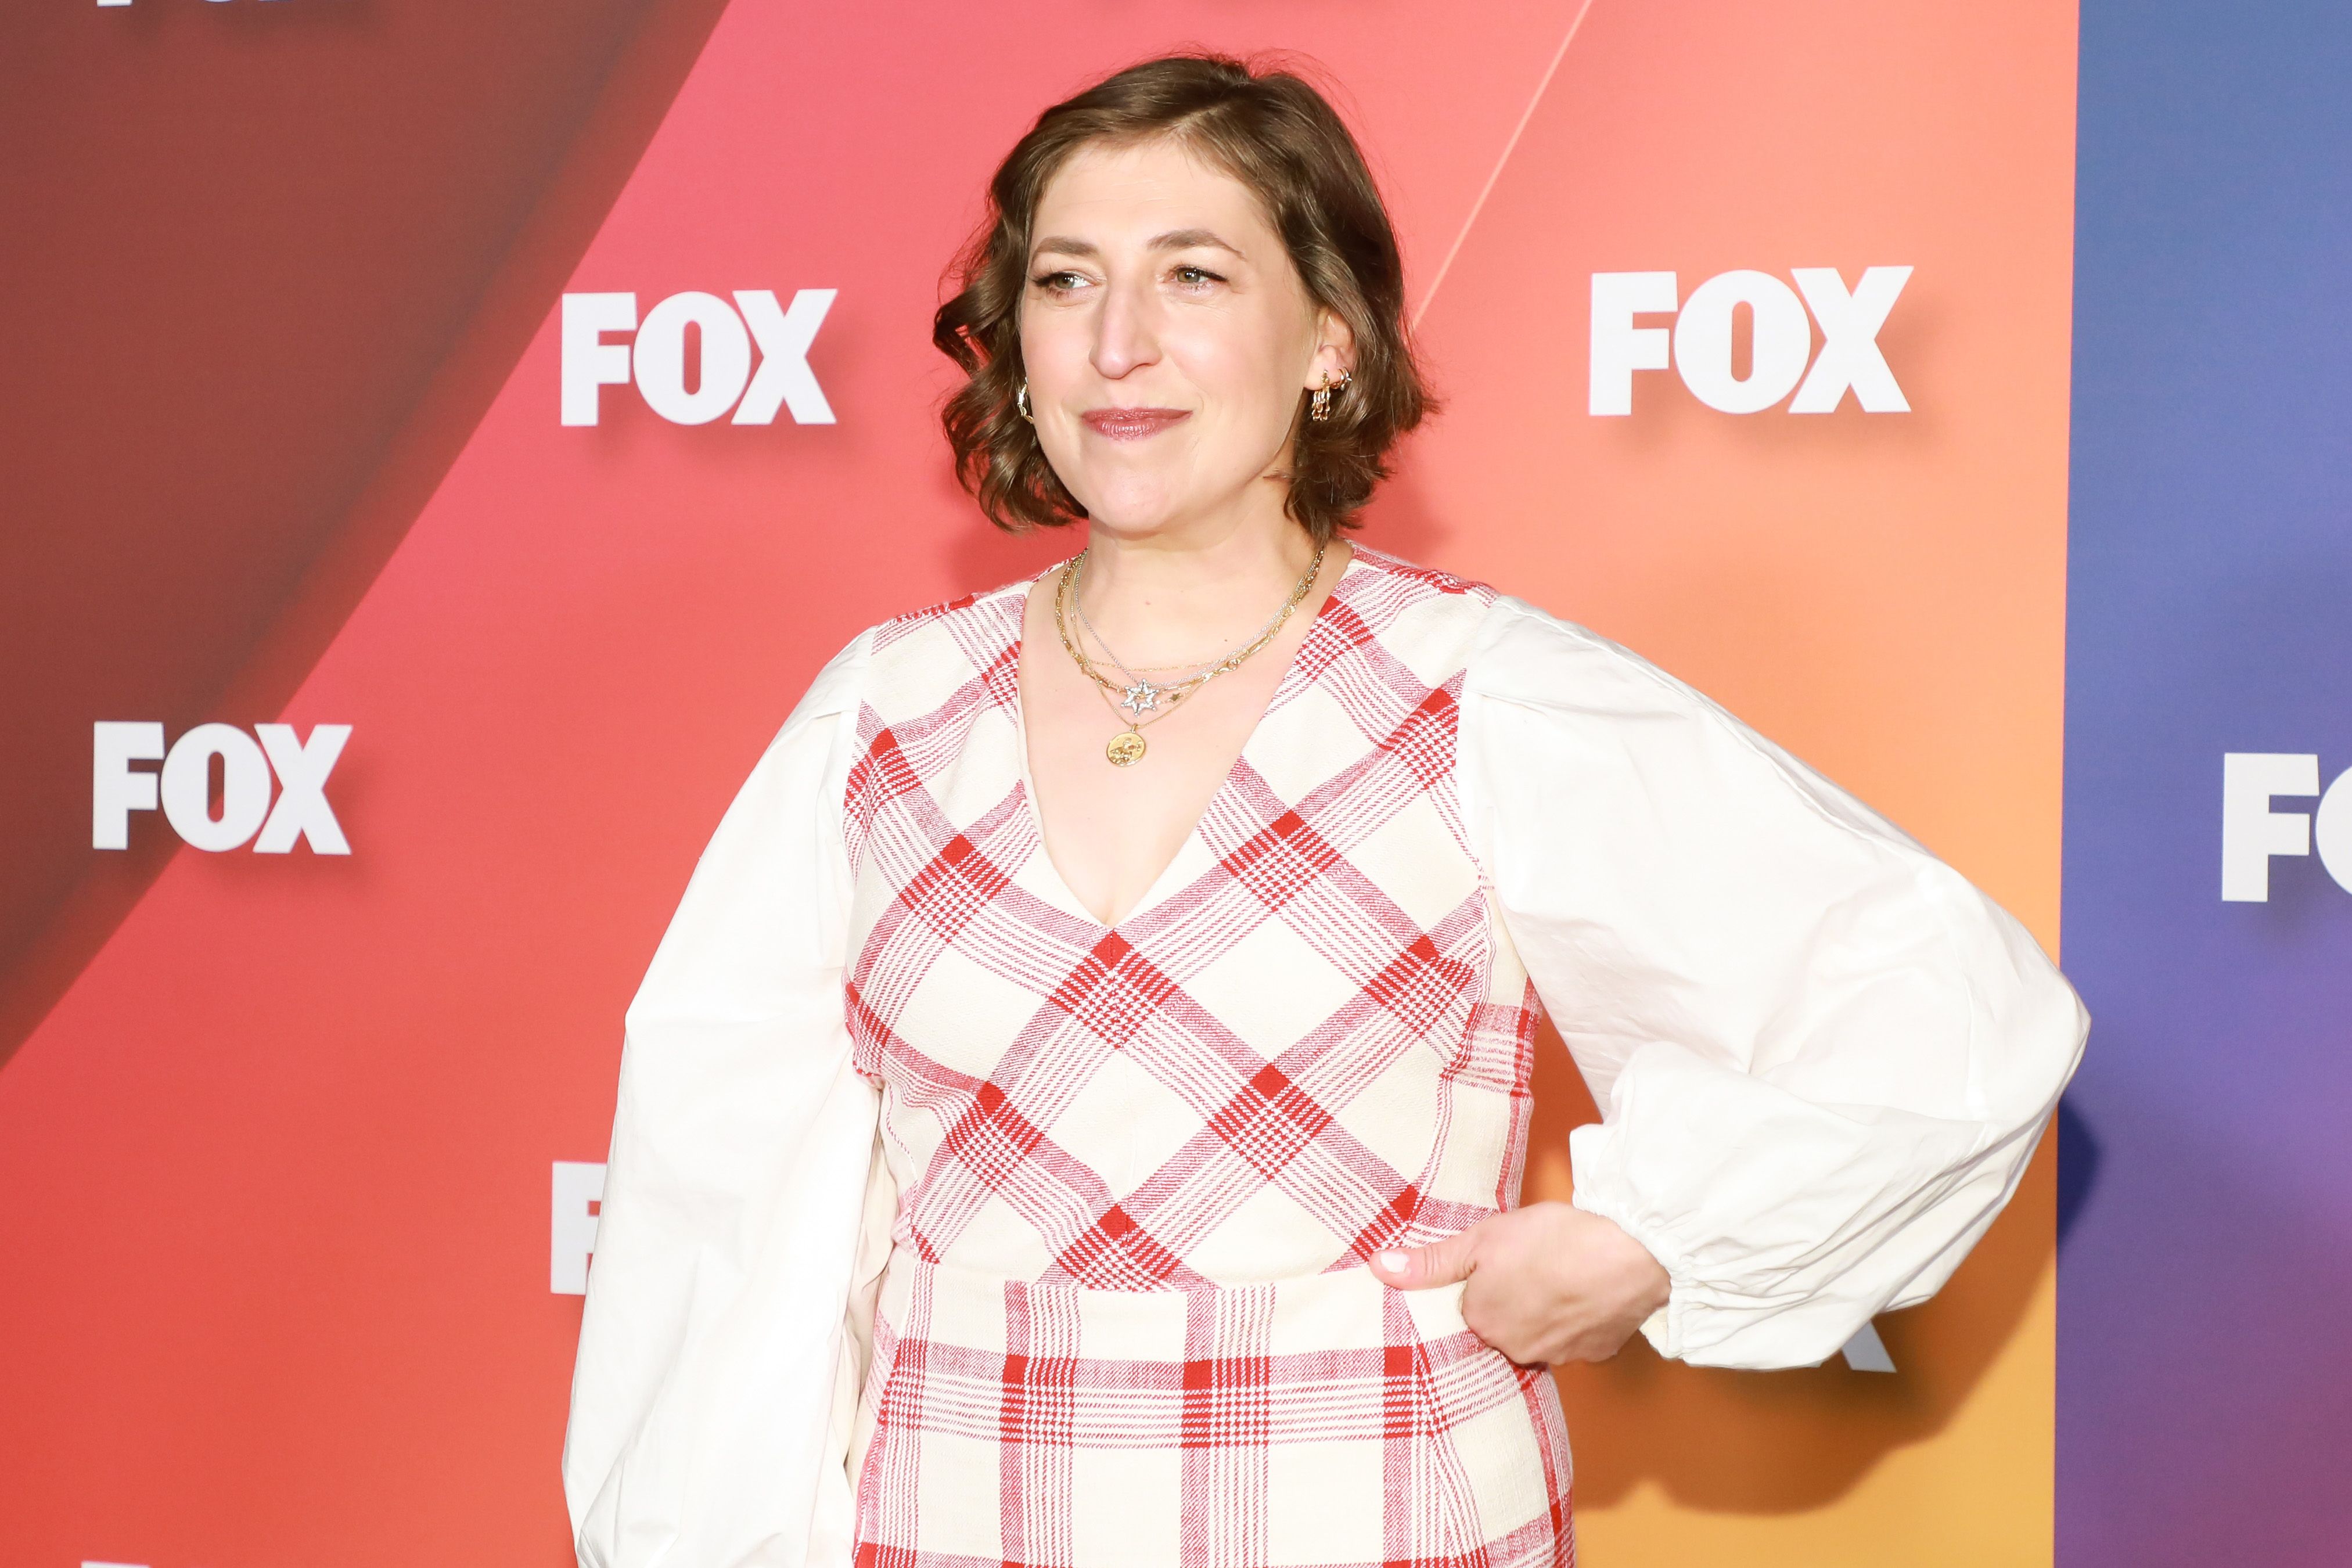 Big Bang Theory' Fans Say "There's a Whole Other Side" of Mayim Bialik After Her New Video